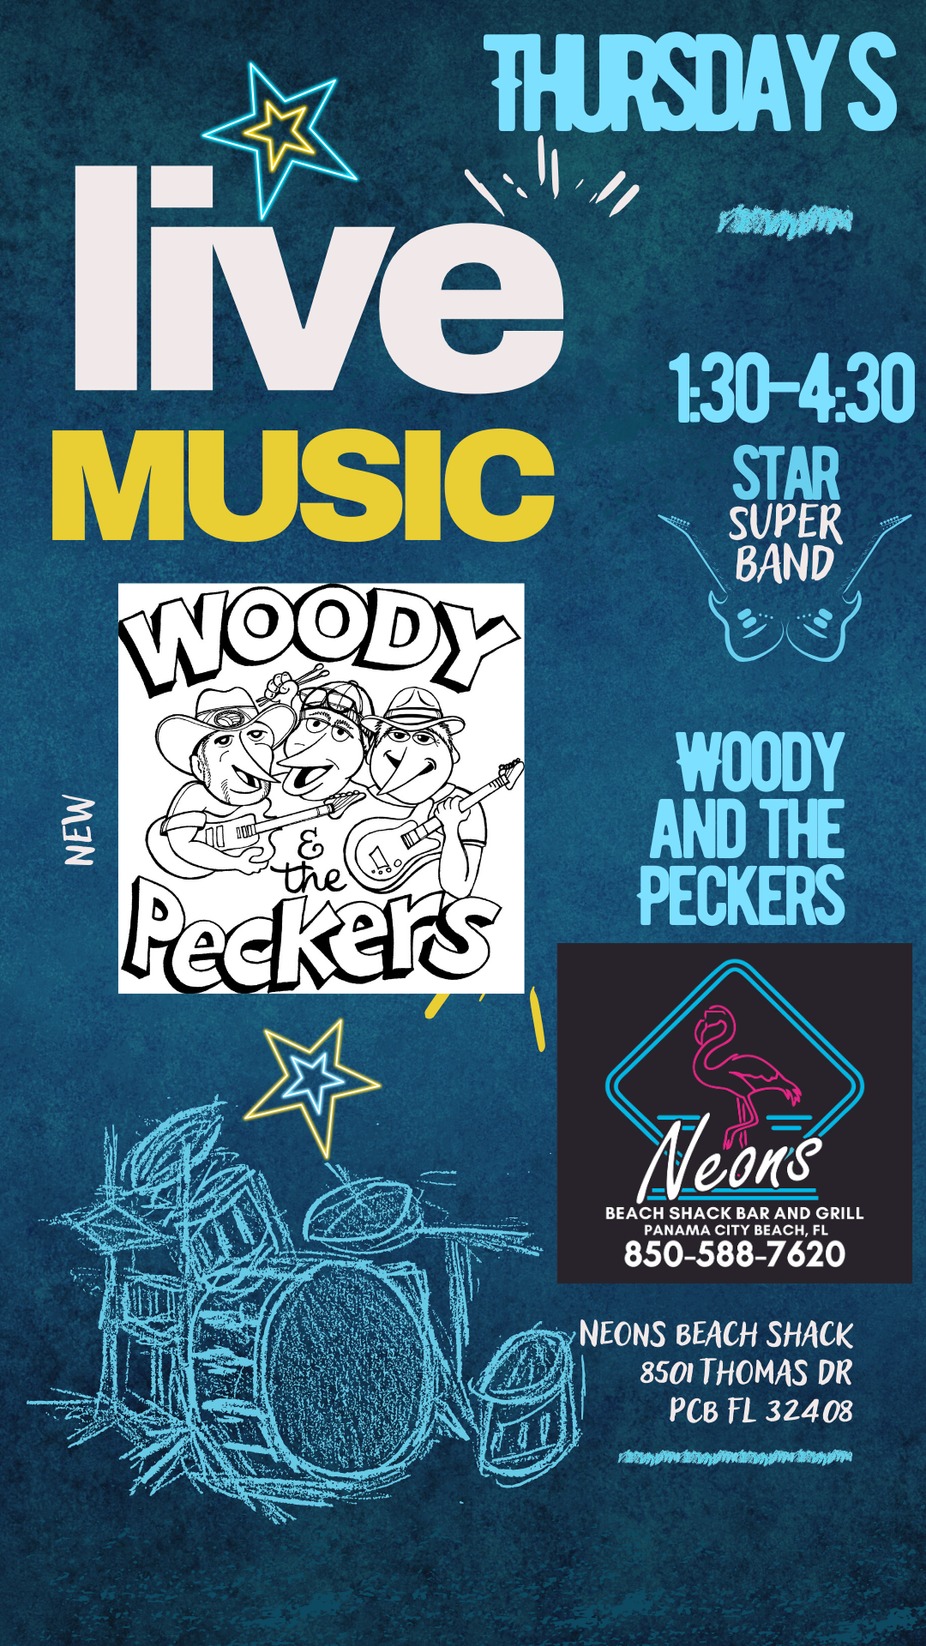 Woody and The Peckers Thursday at 12:30 event photo